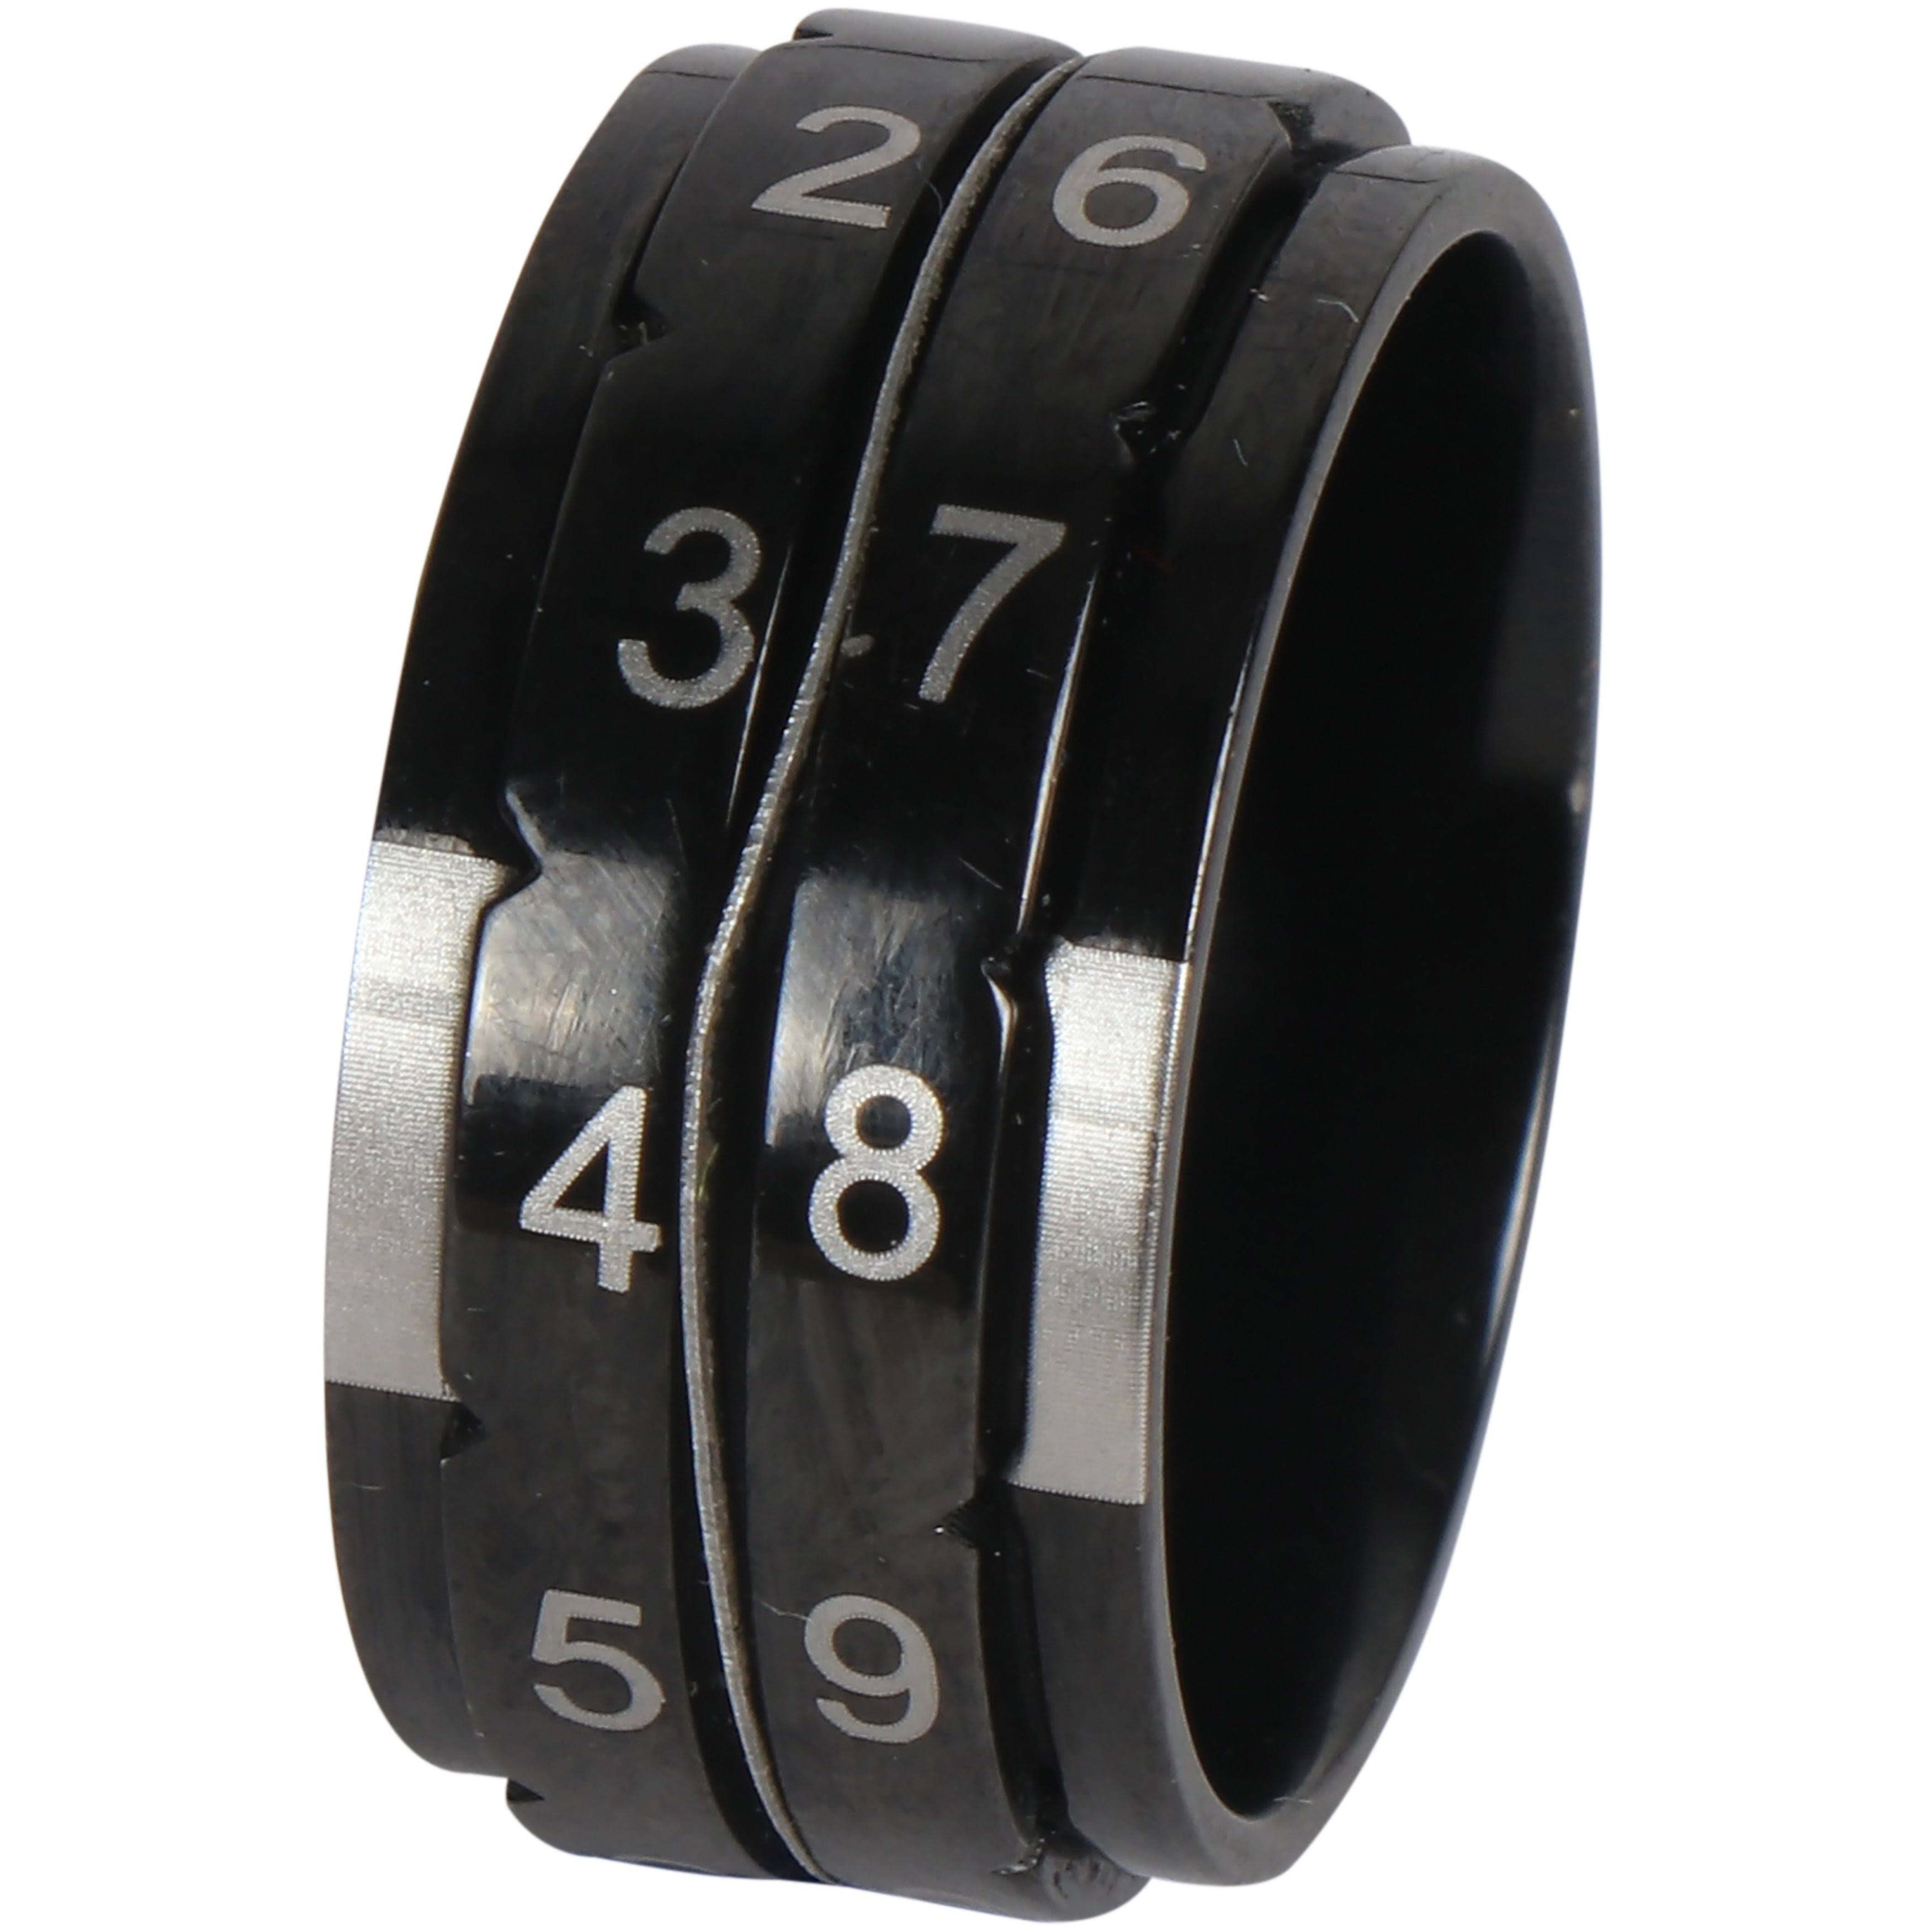 Knitter's Pride Row Counter Ring-Size 10: 19.8mm Diameter